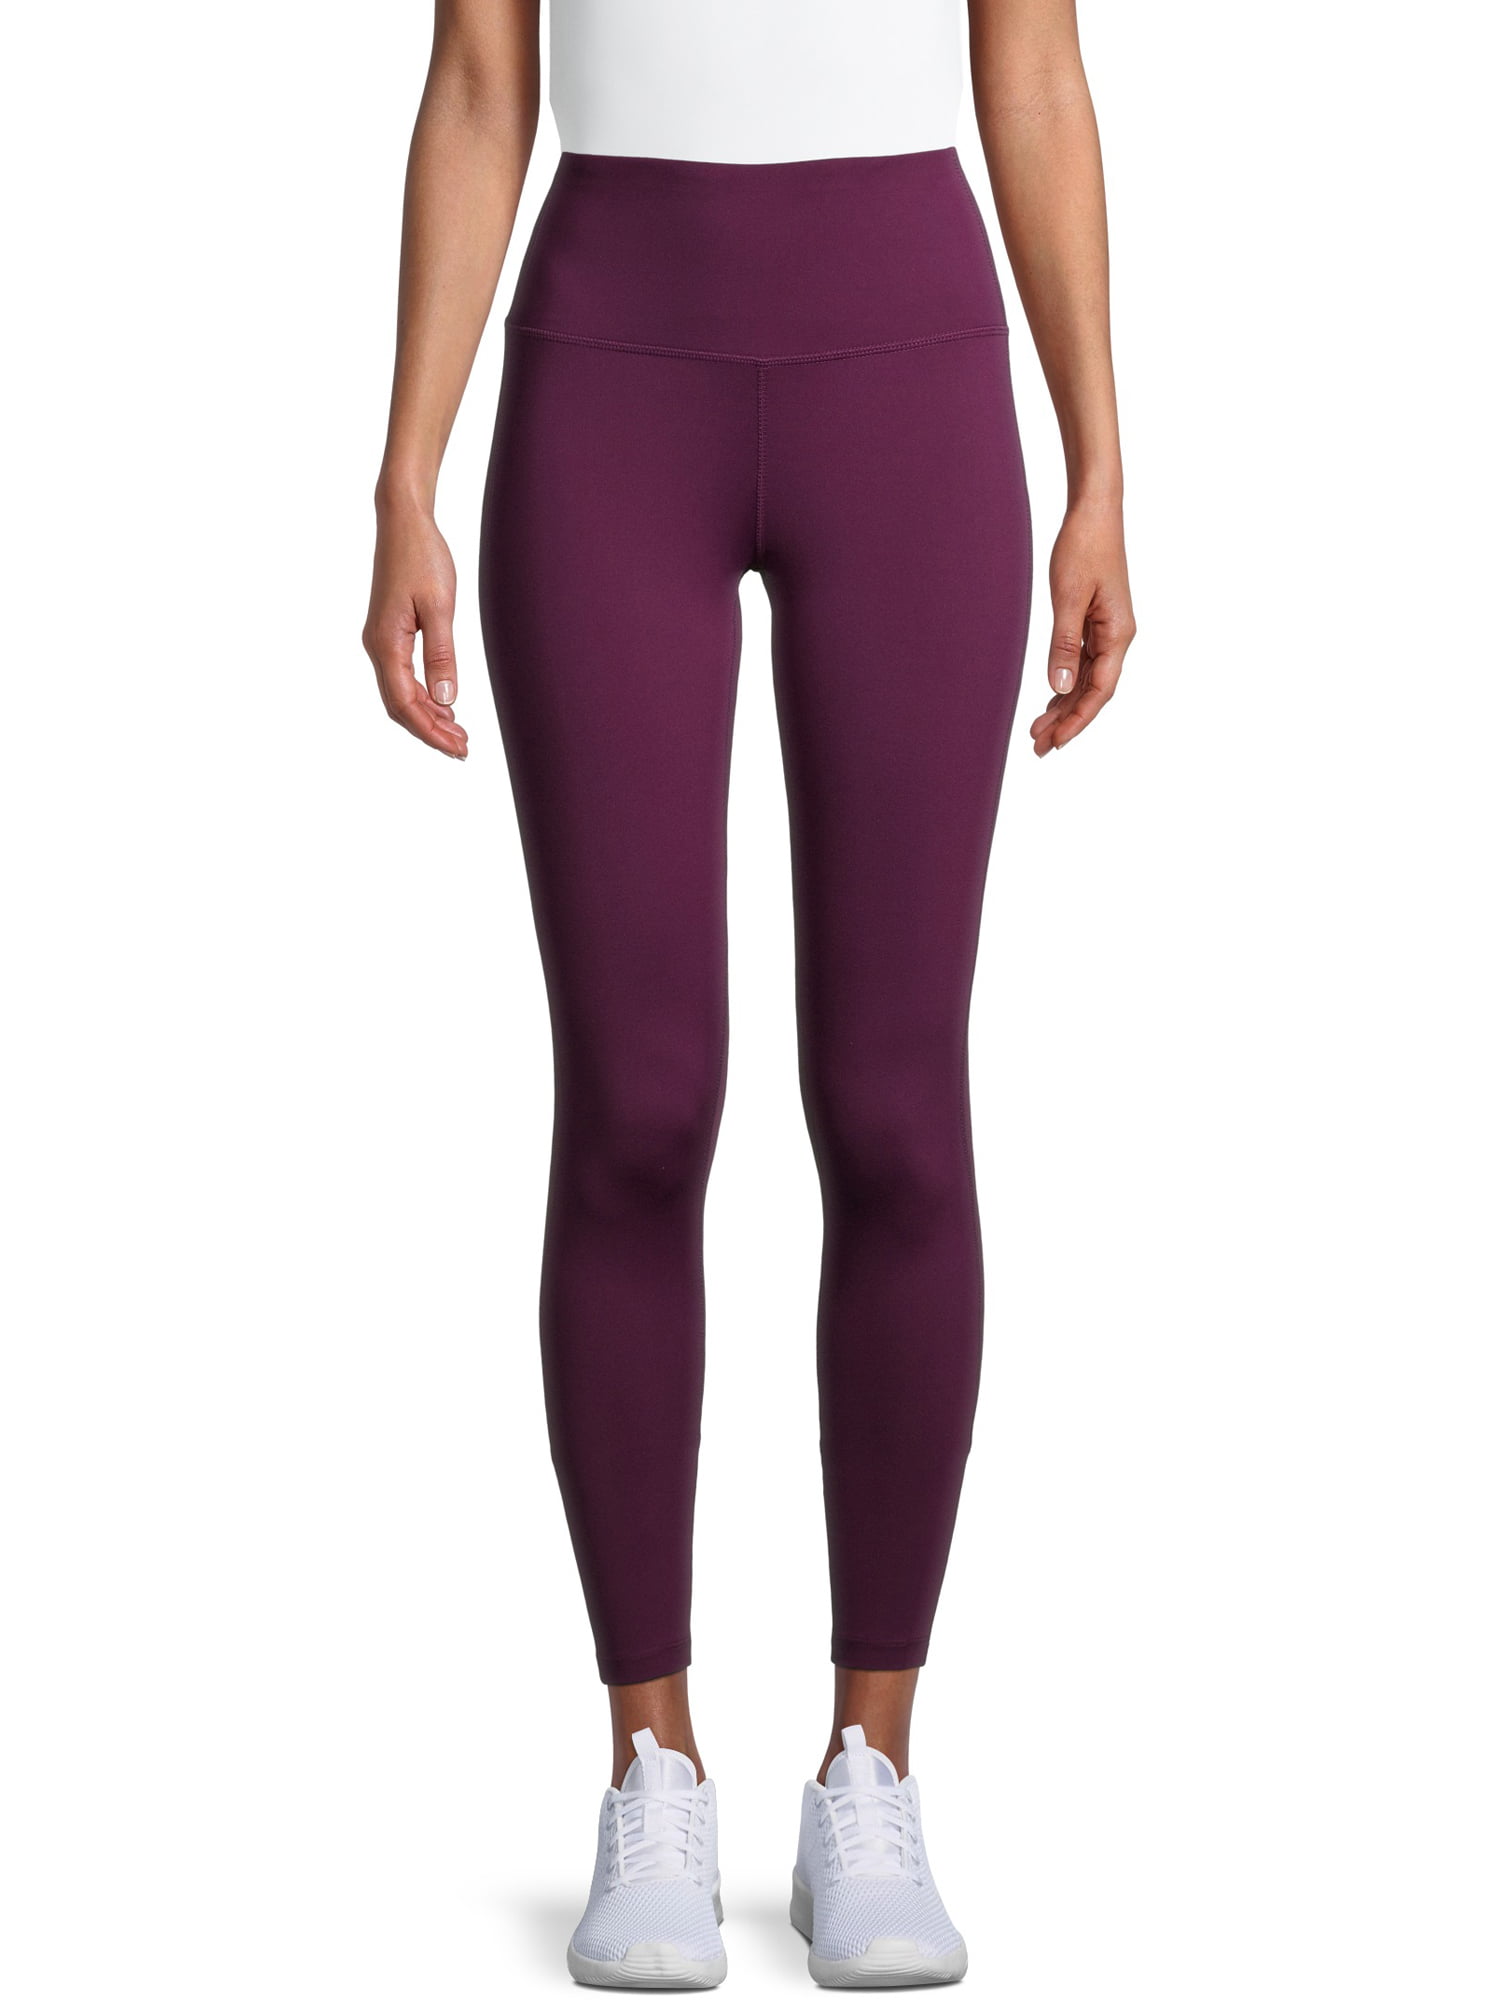 LUCID 7/8 Maroon Leggings, Stylish Gym Essential, Seamless & Supportive, Luxurious Brown Hue